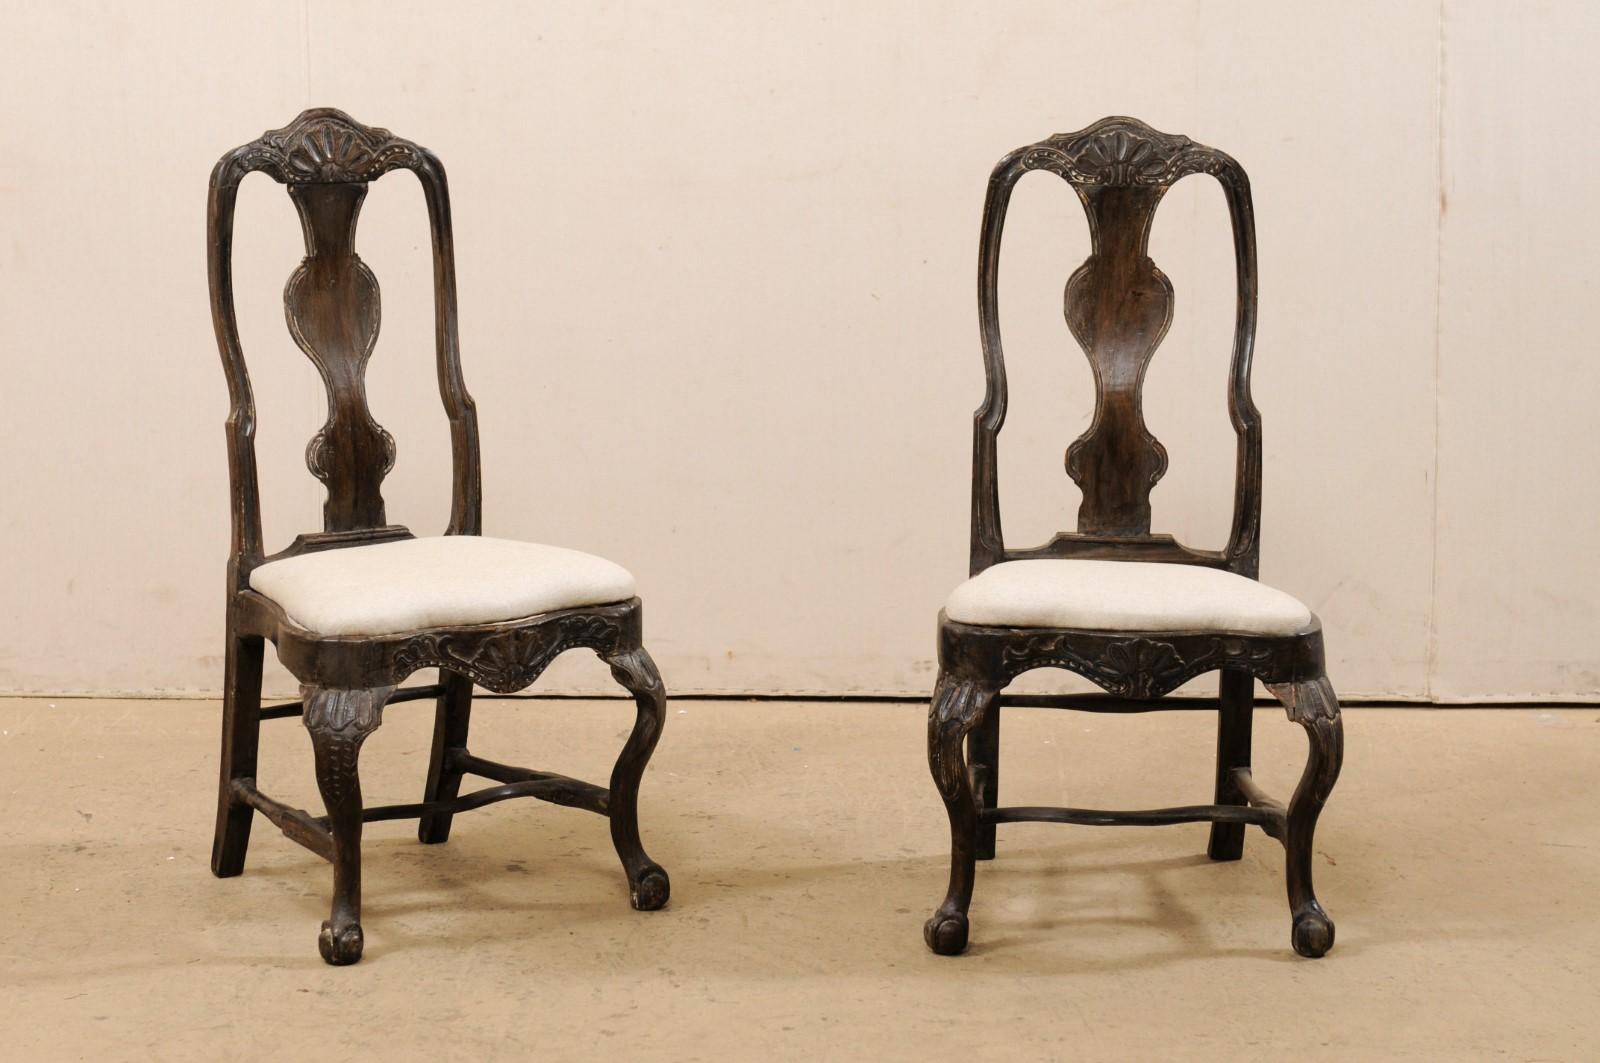 A Swedish pair of period Rococo carved-wood side chairs from the 18th century. This pair of antique chairs from Sweden feature shell motif carvings about the top rail crest and center front seat rail, curvy back splats, stylized knees, and are